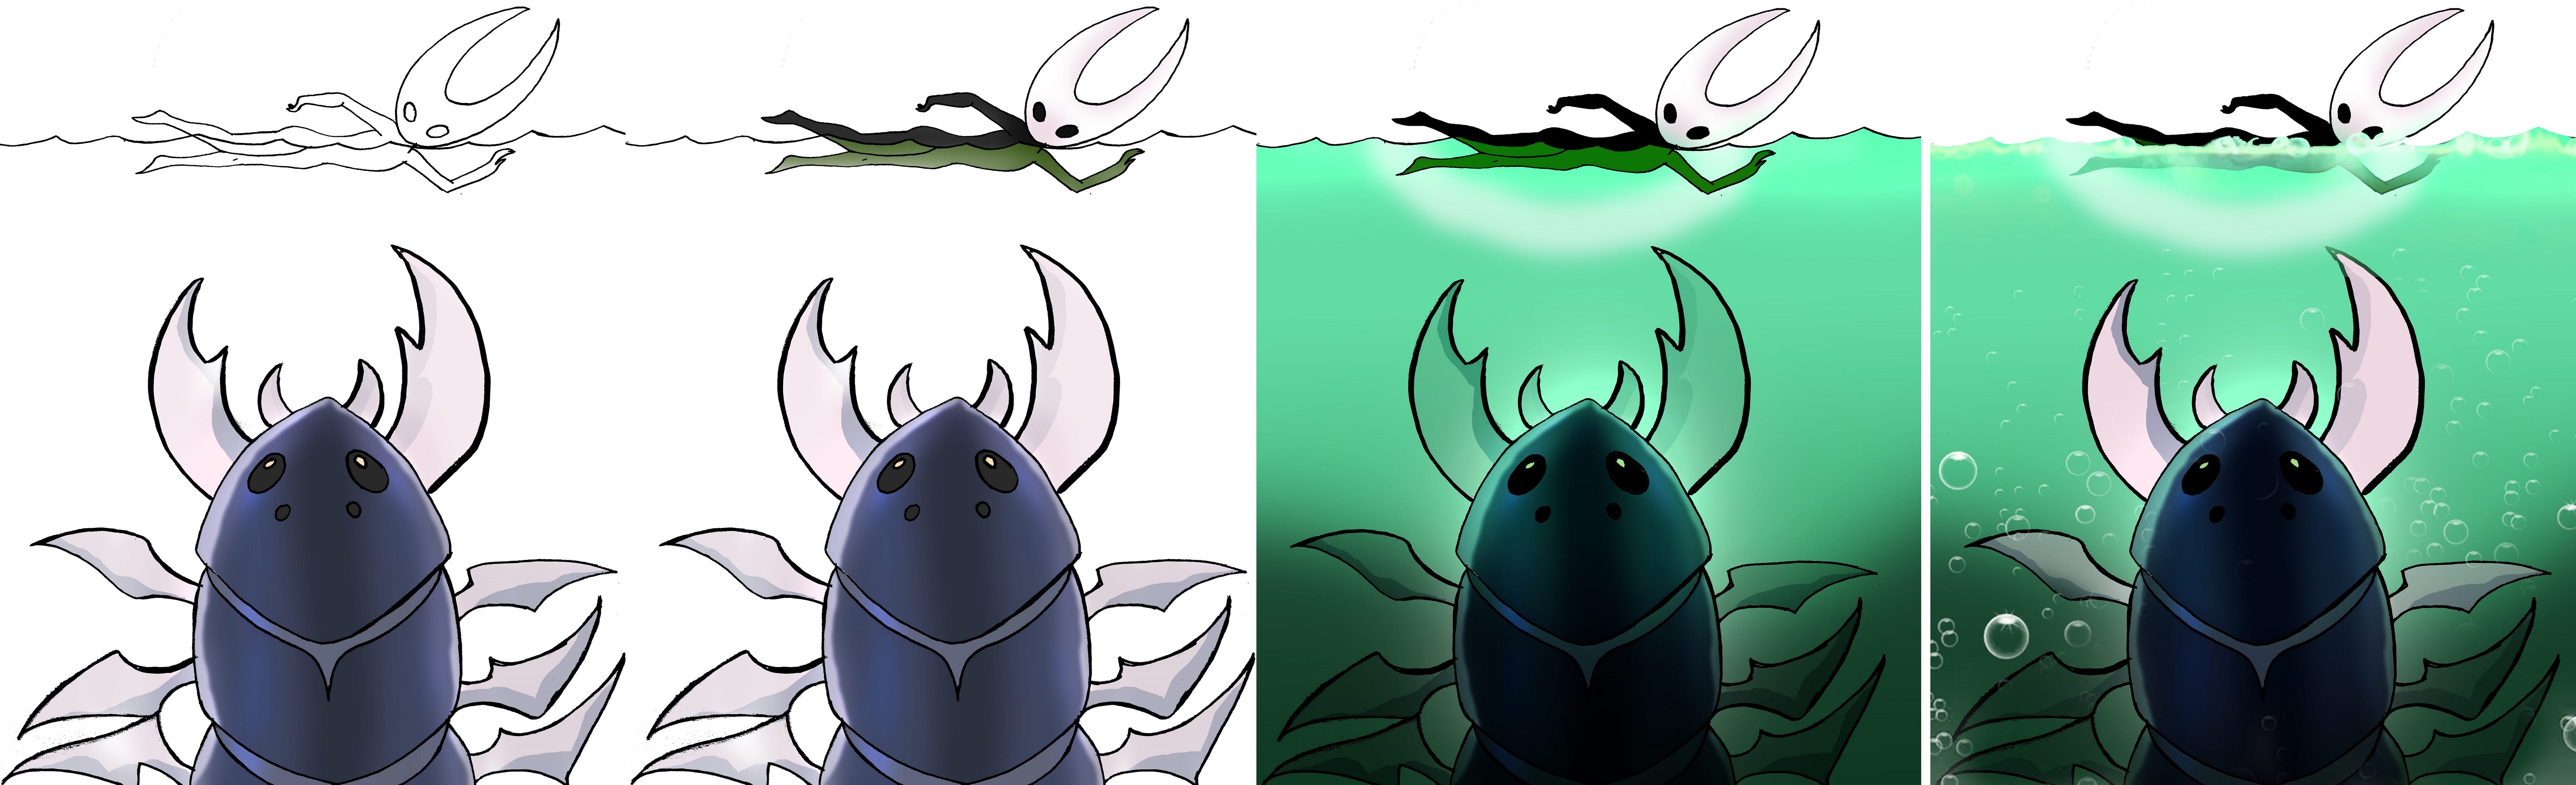 artsy sister, hollow knight fanart, claws jaws